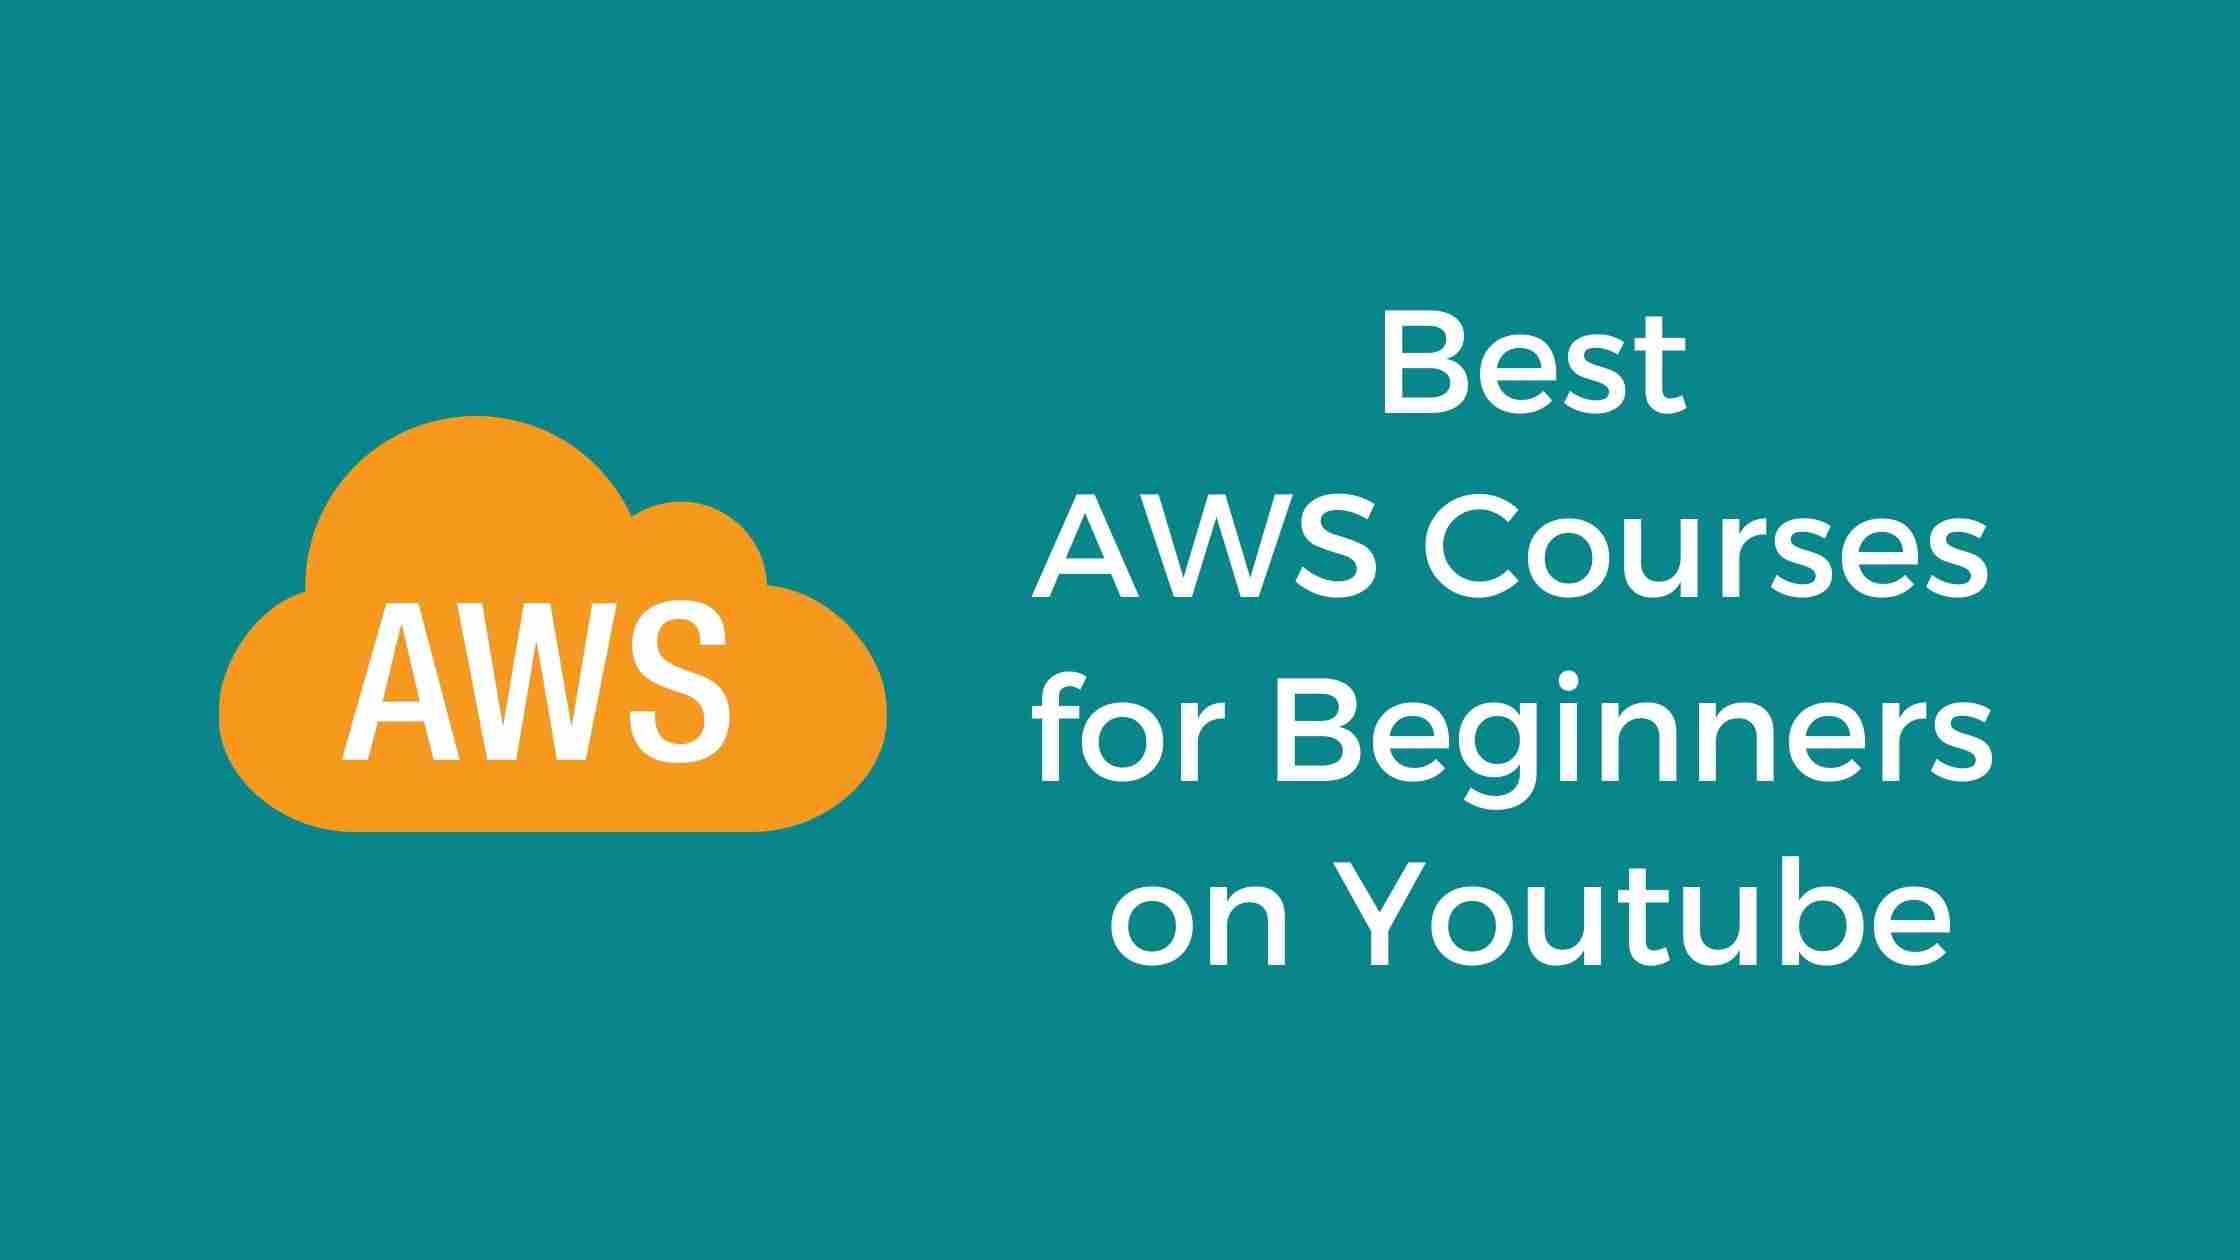 Best AWS Courses for Beginners on Youtube